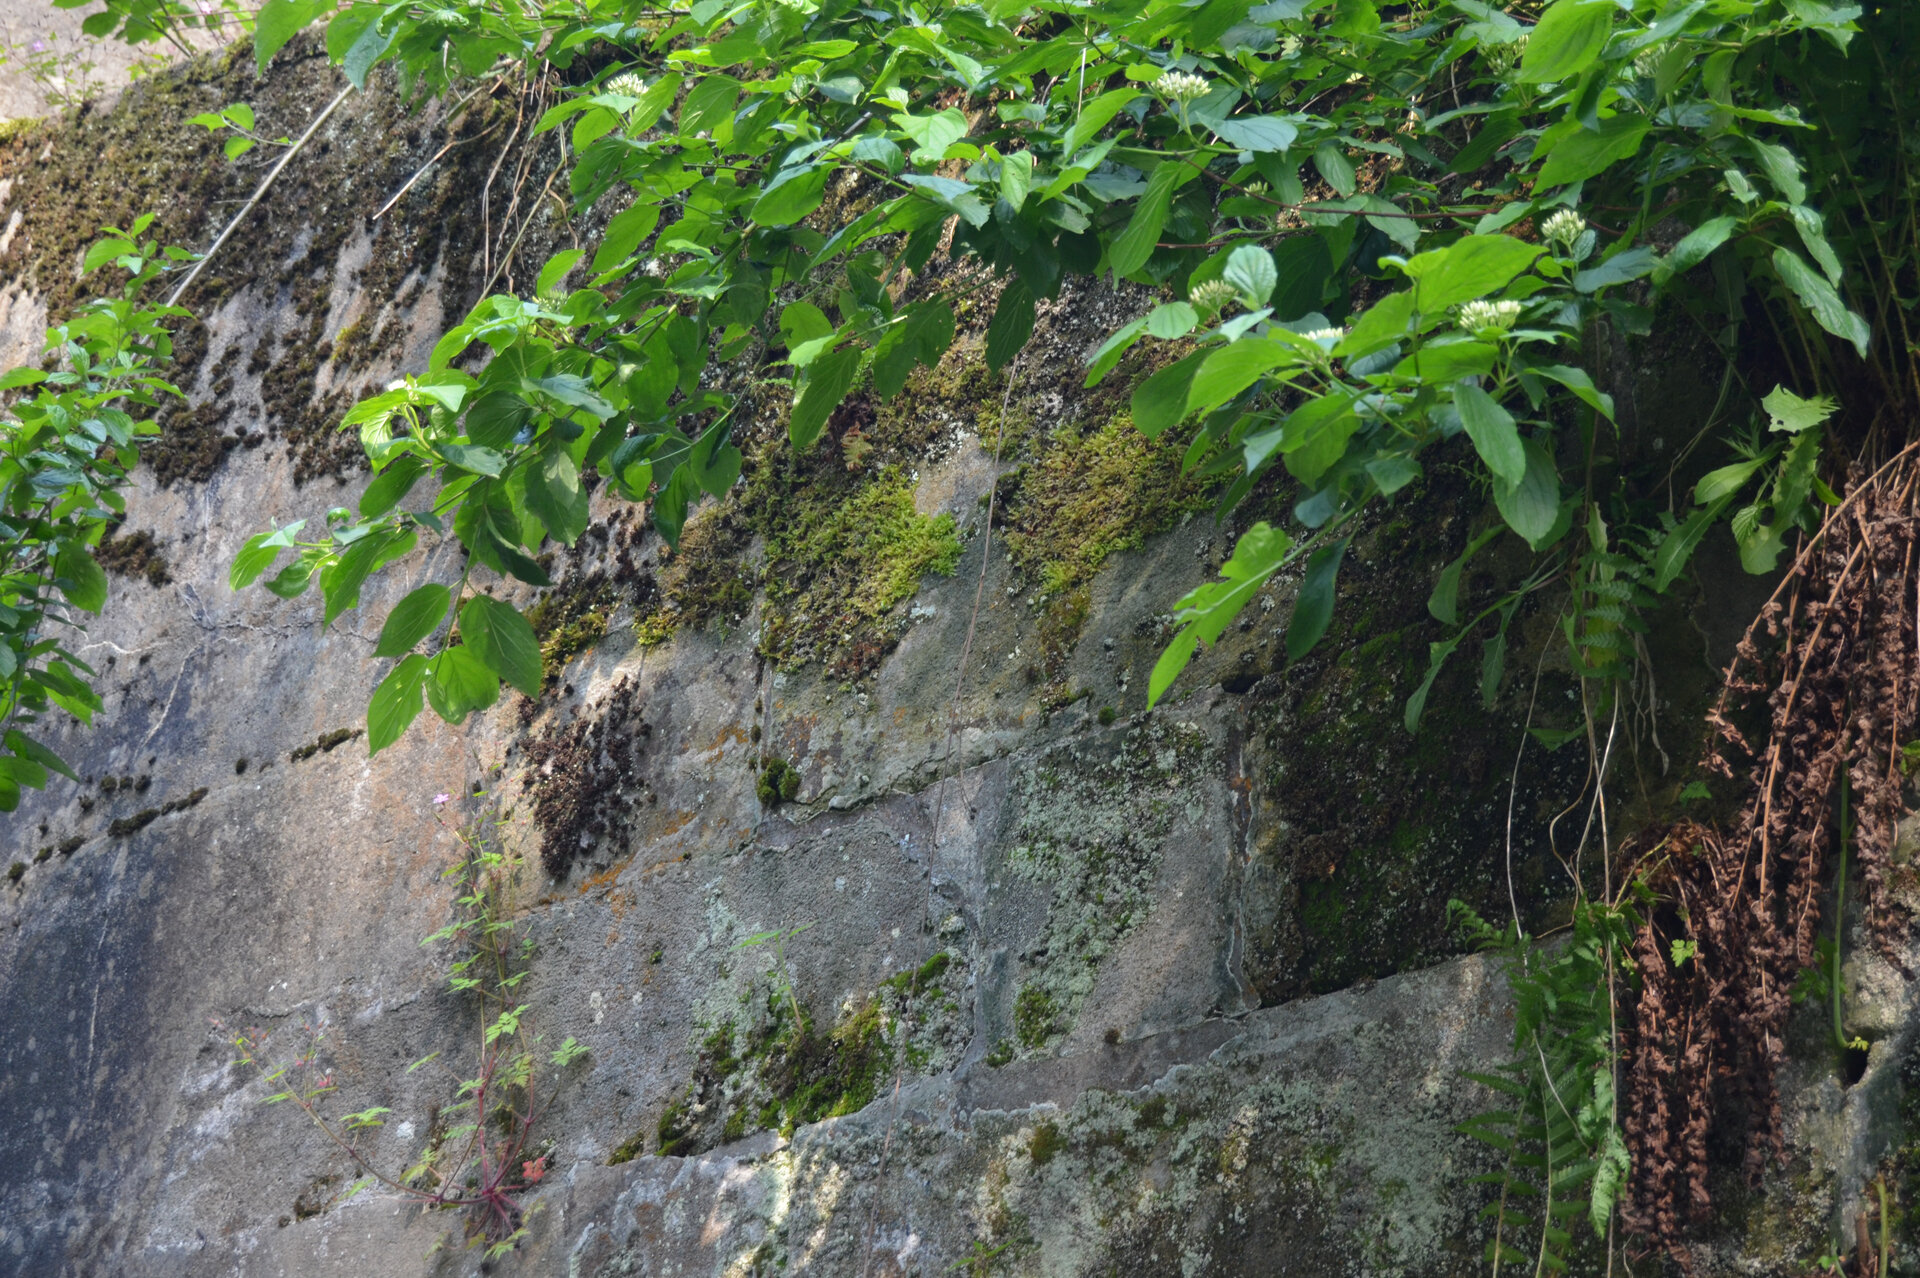 Plants are growing alongside the stone wall of the Schiefe Ebene